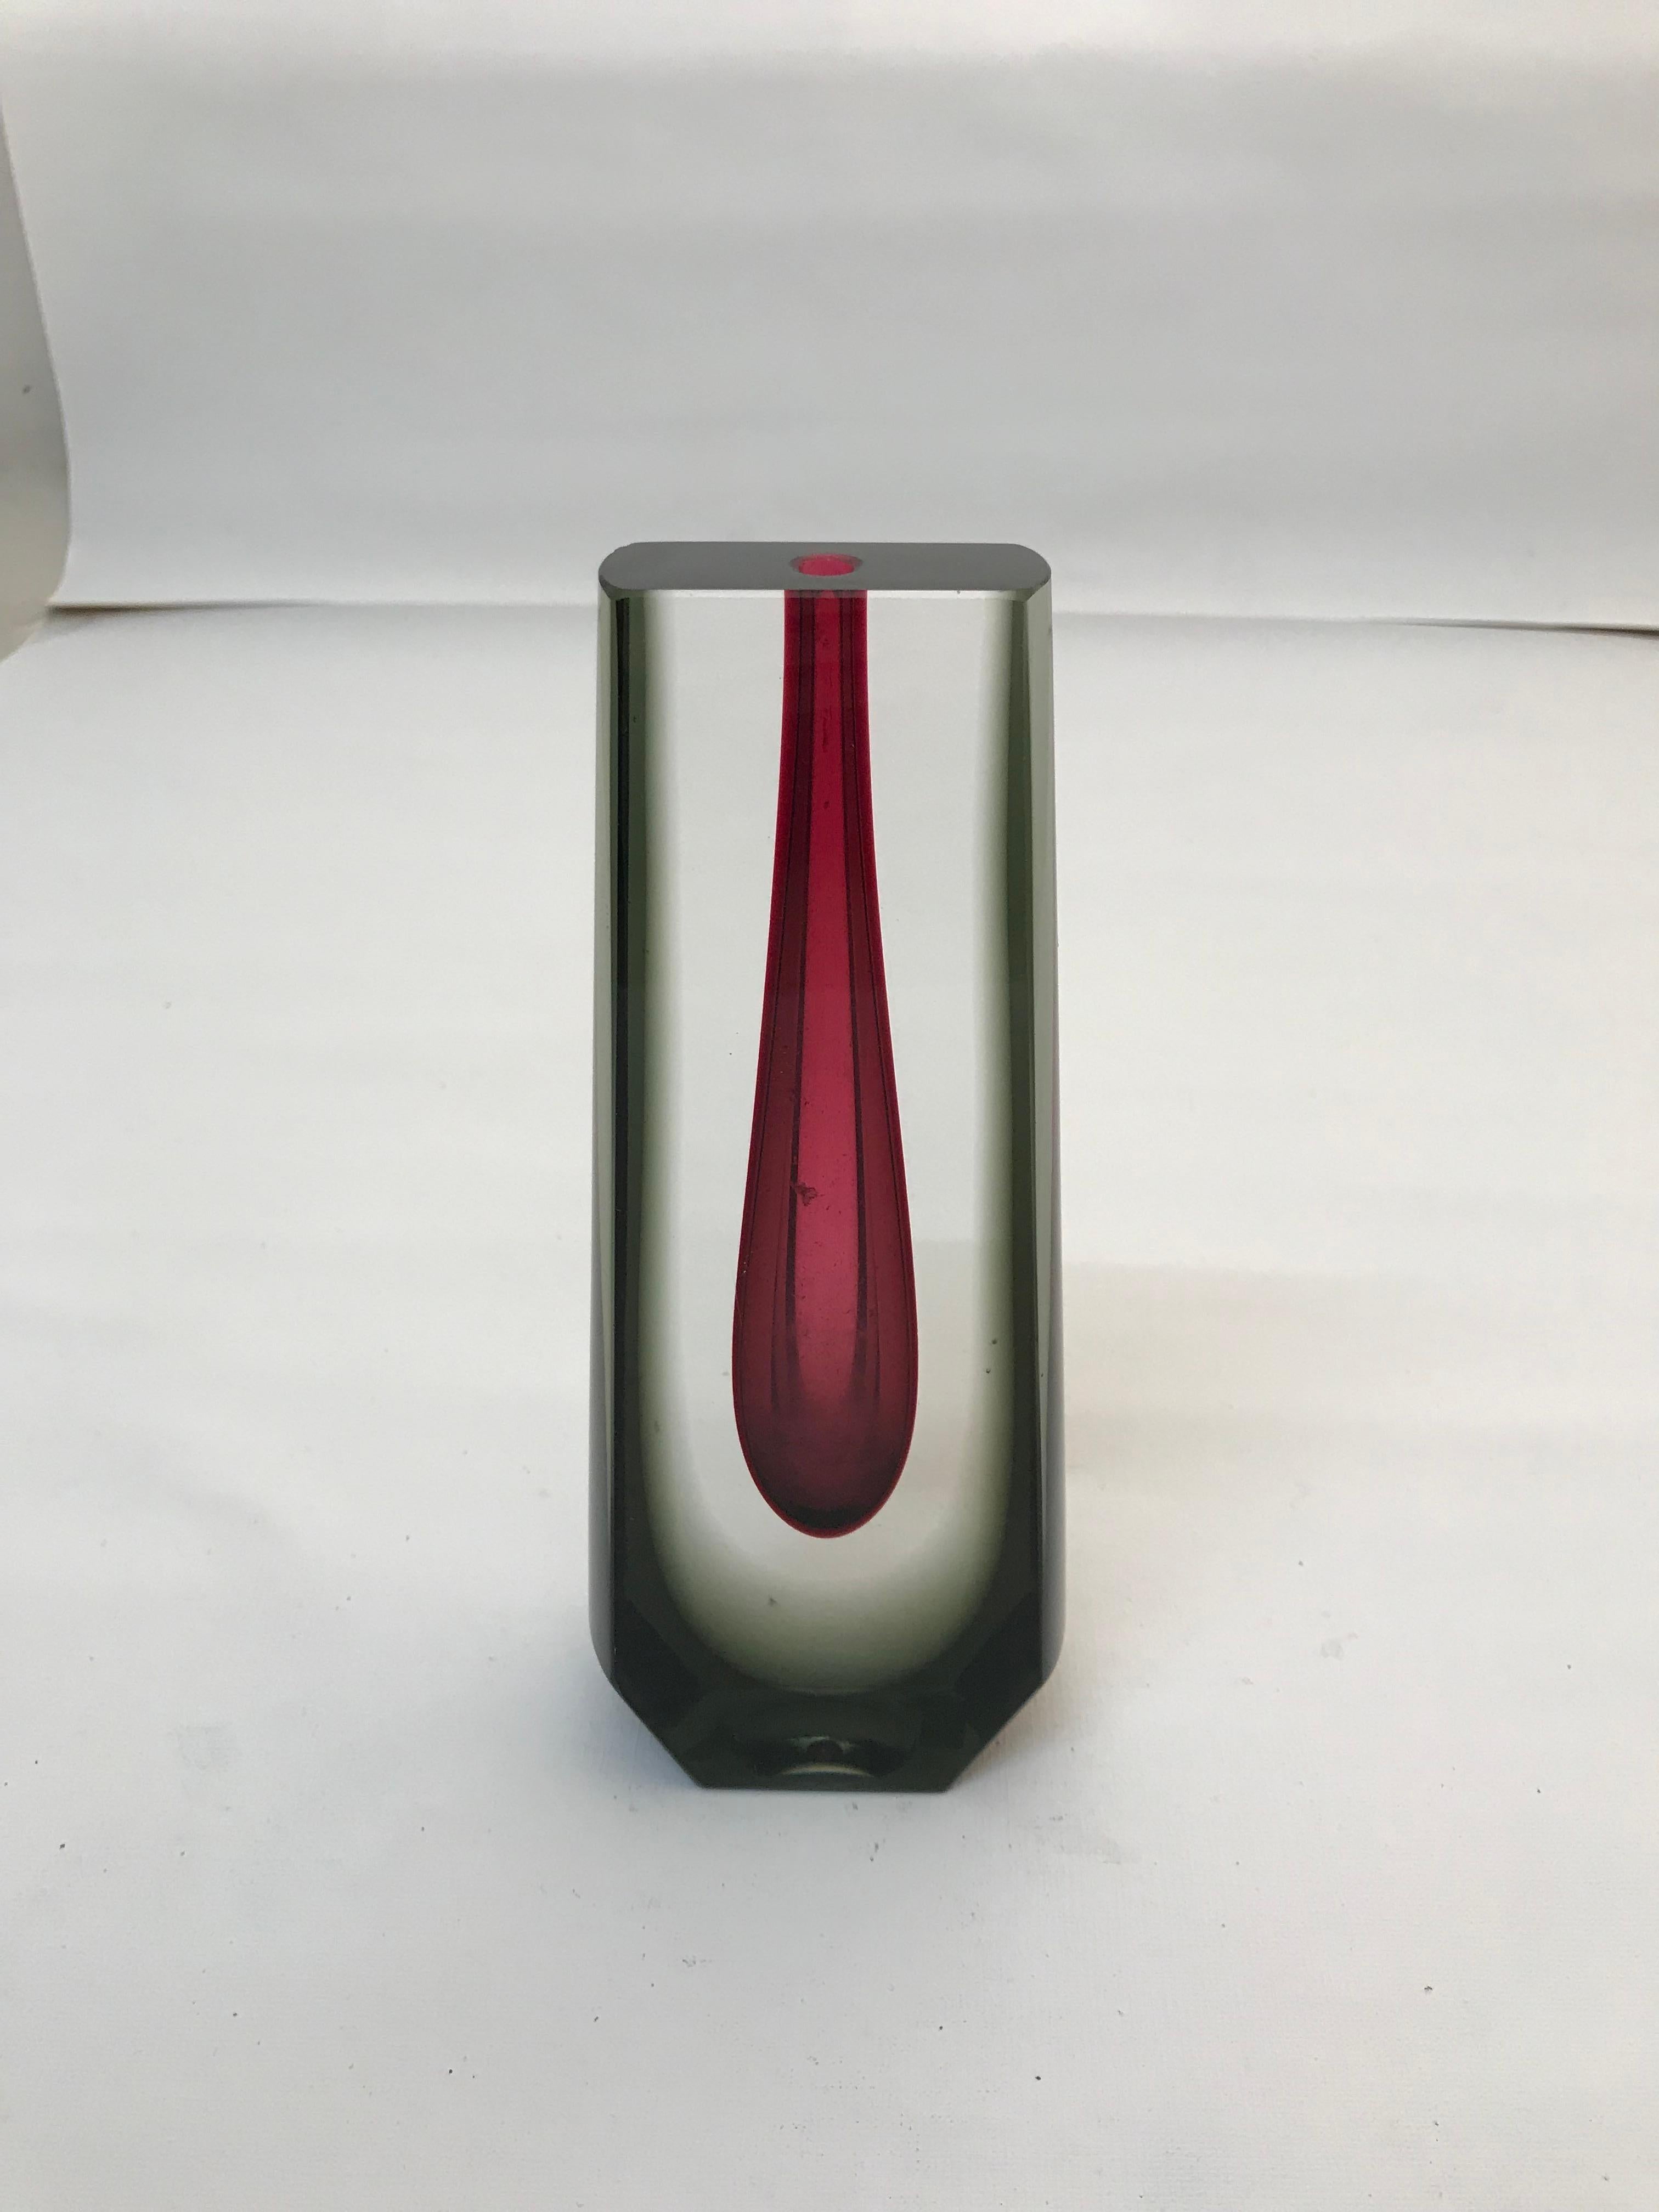 Vase in Murano

We have specialized in the sale of Art Deco and Art Nouveau and Vintage styles since 1982. If you have any questions we are at your disposal.
Pushing the button that reads 'View All From Seller'. And you can see more objects to the